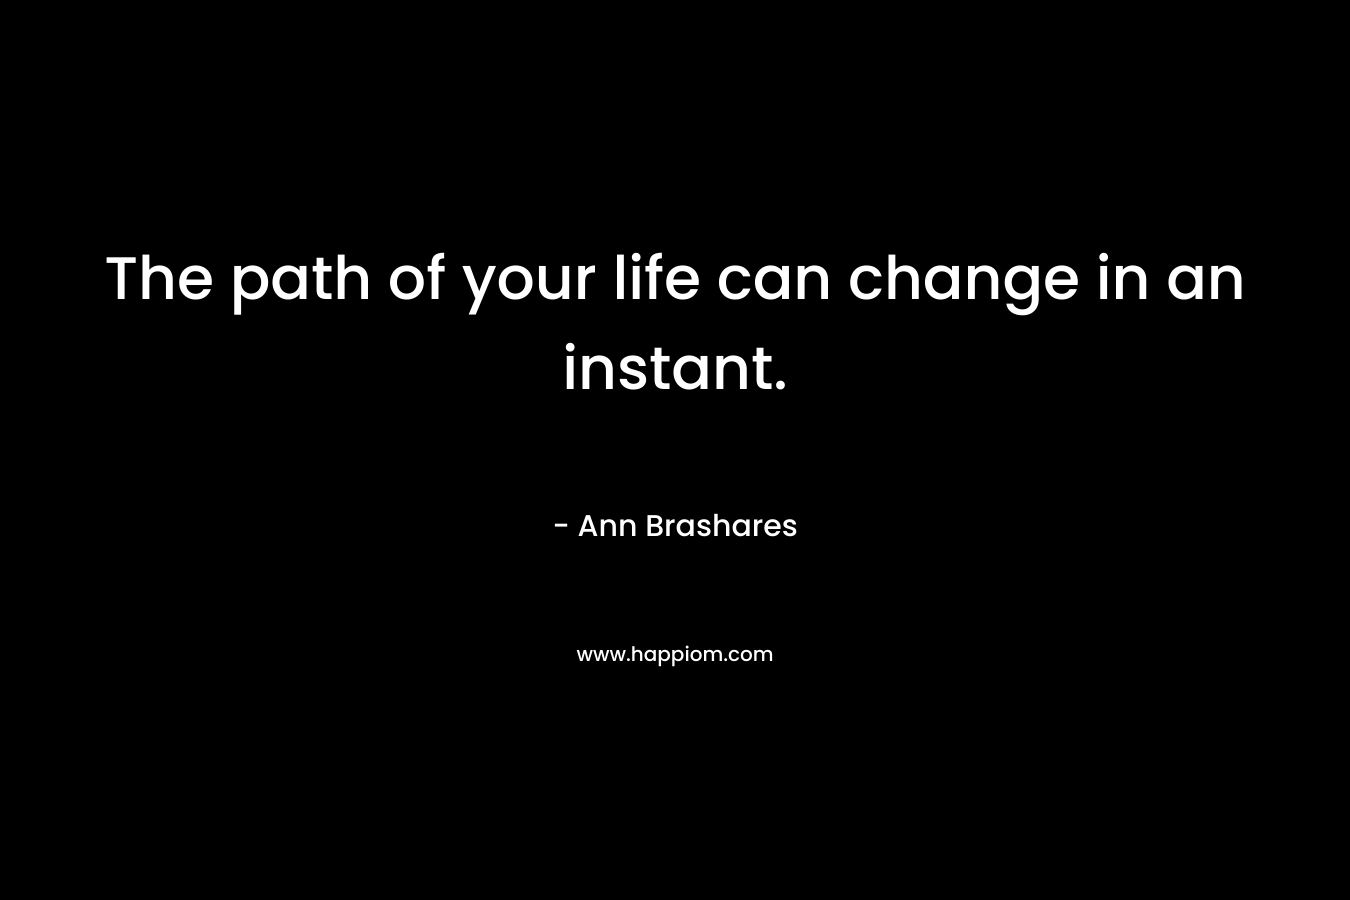 The path of your life can change in an instant.